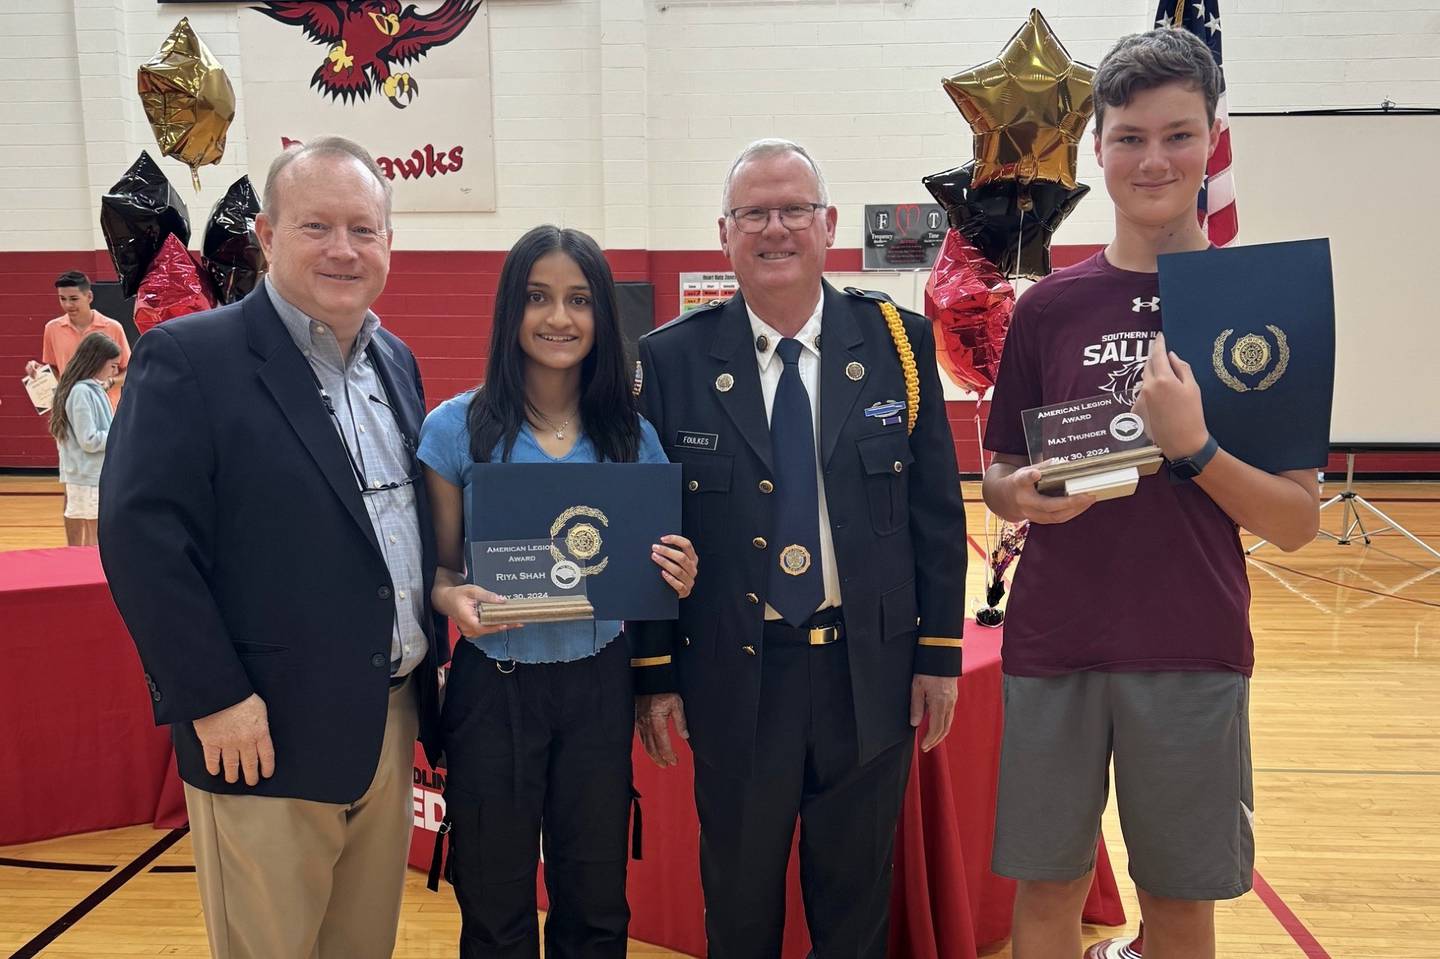 St. Charles American Legion Post 342 member Mike Foulkes presents Wredling Middle School students Riya Shah and Maximillian Thunder with the American Legion School Award at the 8th grade awards ceremony on May 30, 2024.
(From Left: Wredling Middle School Principal Tim Loversky, Shah, Foulkes and Thunder)